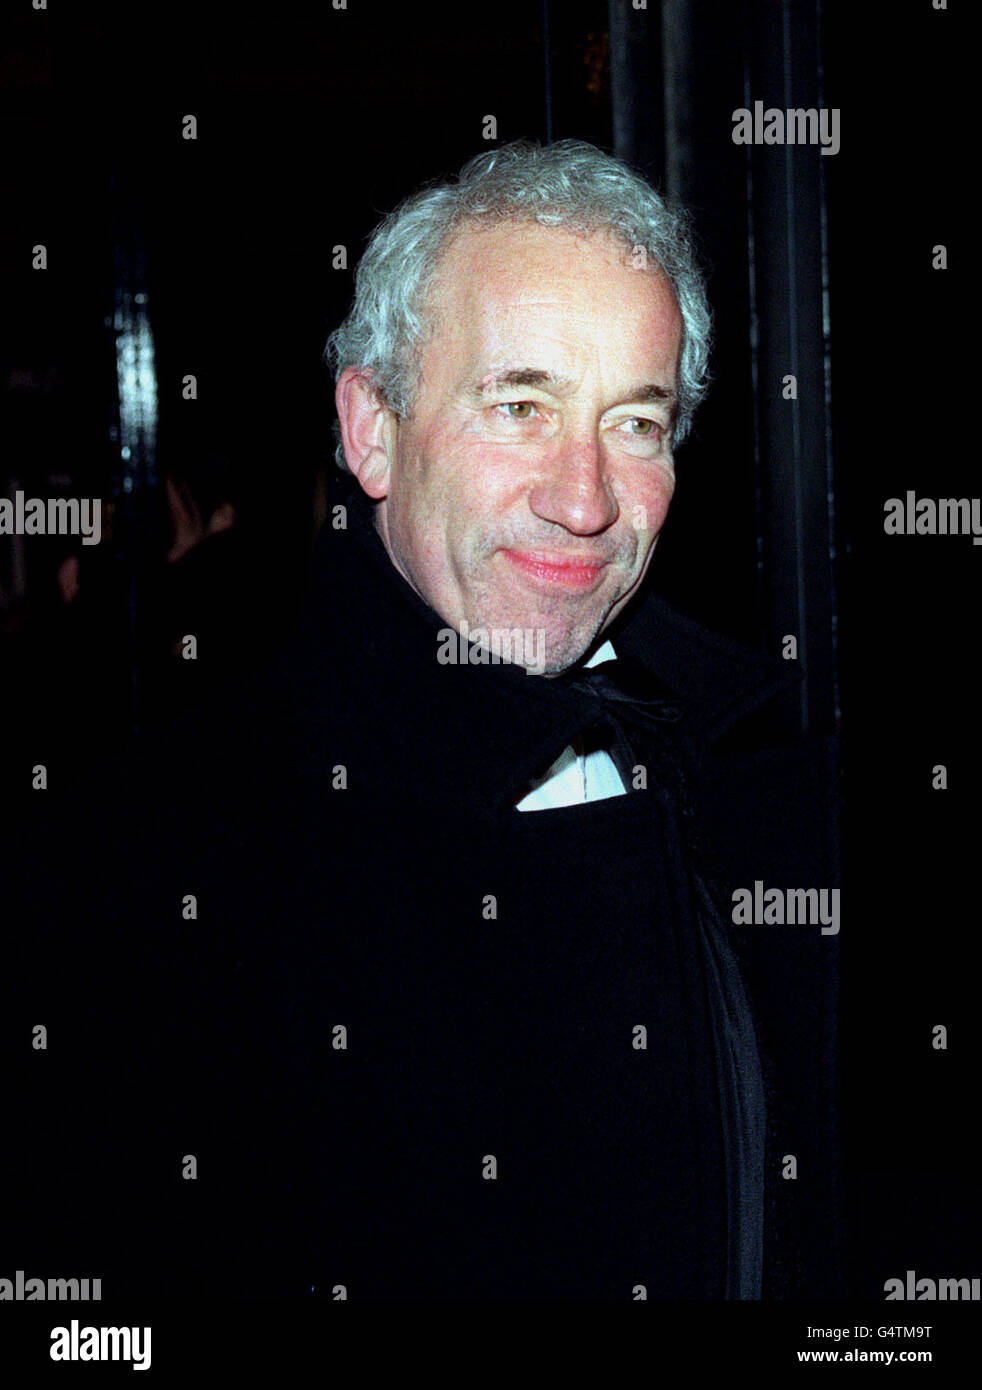 Simon Callow arriving for the UK Premiere of Walt Disney's 'Fantasia/2000' at the Royal Albert Hall, in London. * 19/10/01 actor and author Simon Callow who is to present the 25th Gramophone Awards - the classical music recording industry's Oscars, at the Barbican in London. Over the years prestigious names from the classical music world have all received awards at the ceremony including Sir Georg Solti, Dame Kiri te Kanawa and Angela Gheorghiu. Stock Photo